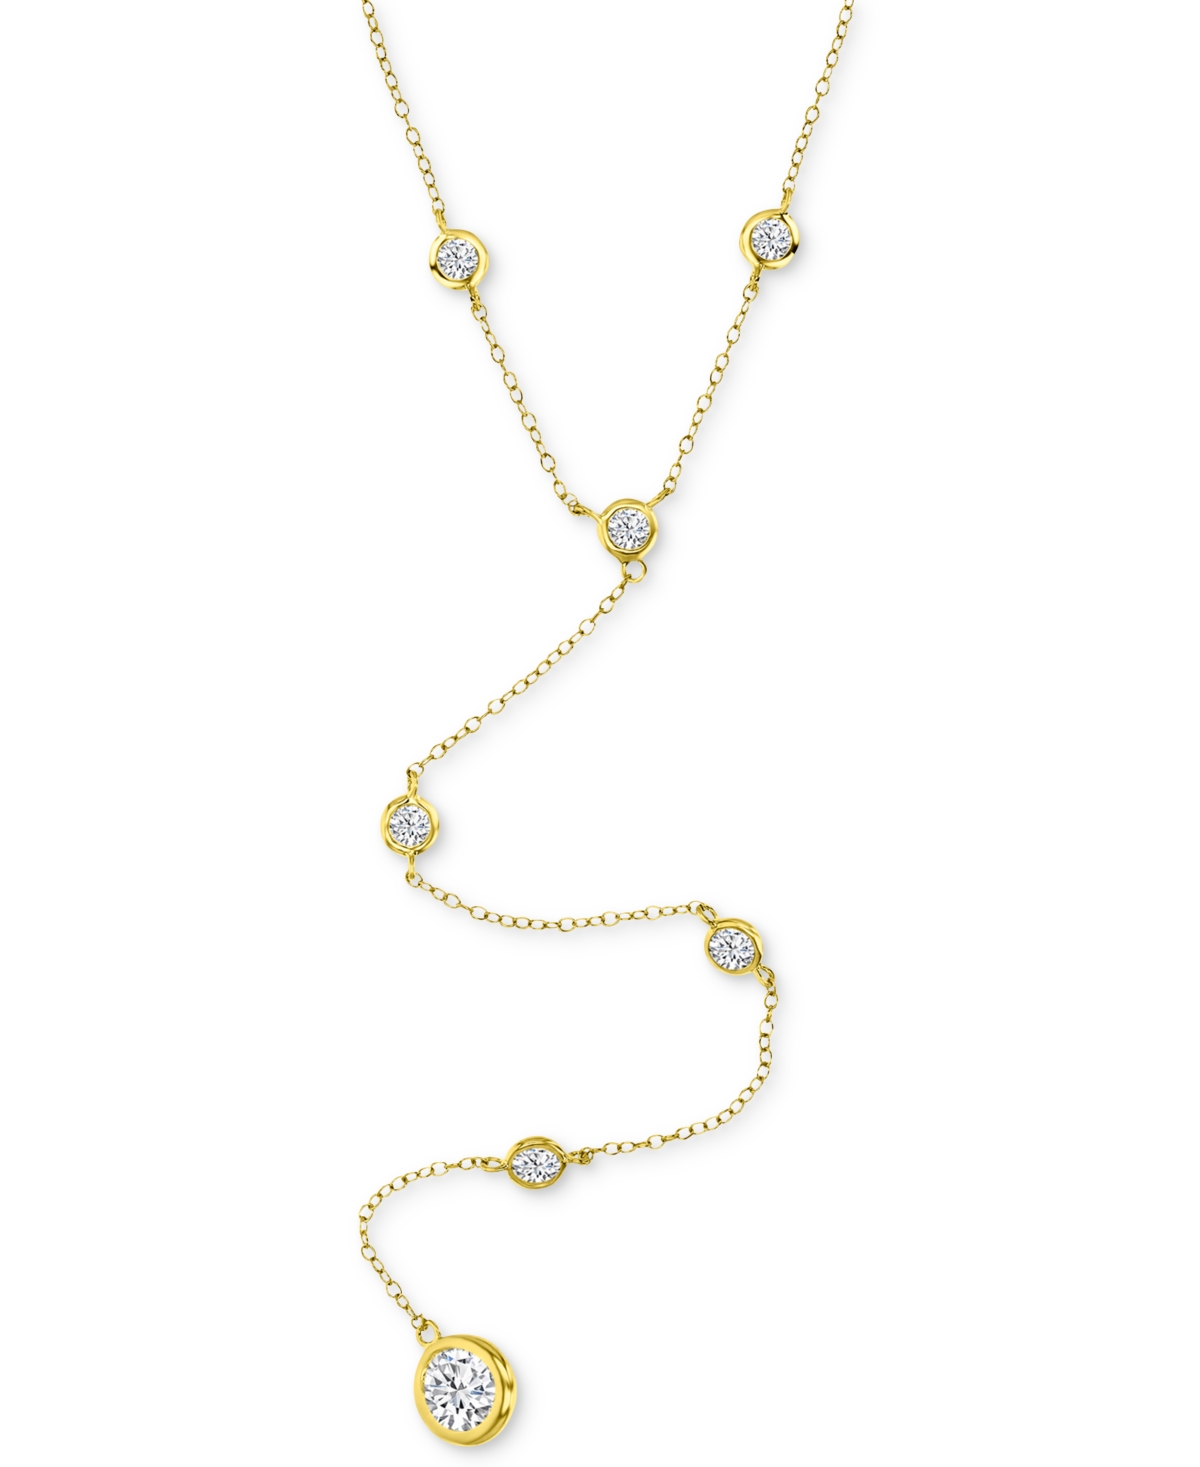 Cubic Zirconia Bezel Lariat Necklace in 14k Gold-Plated Sterling Silver, 18" + 2" extender - Gold